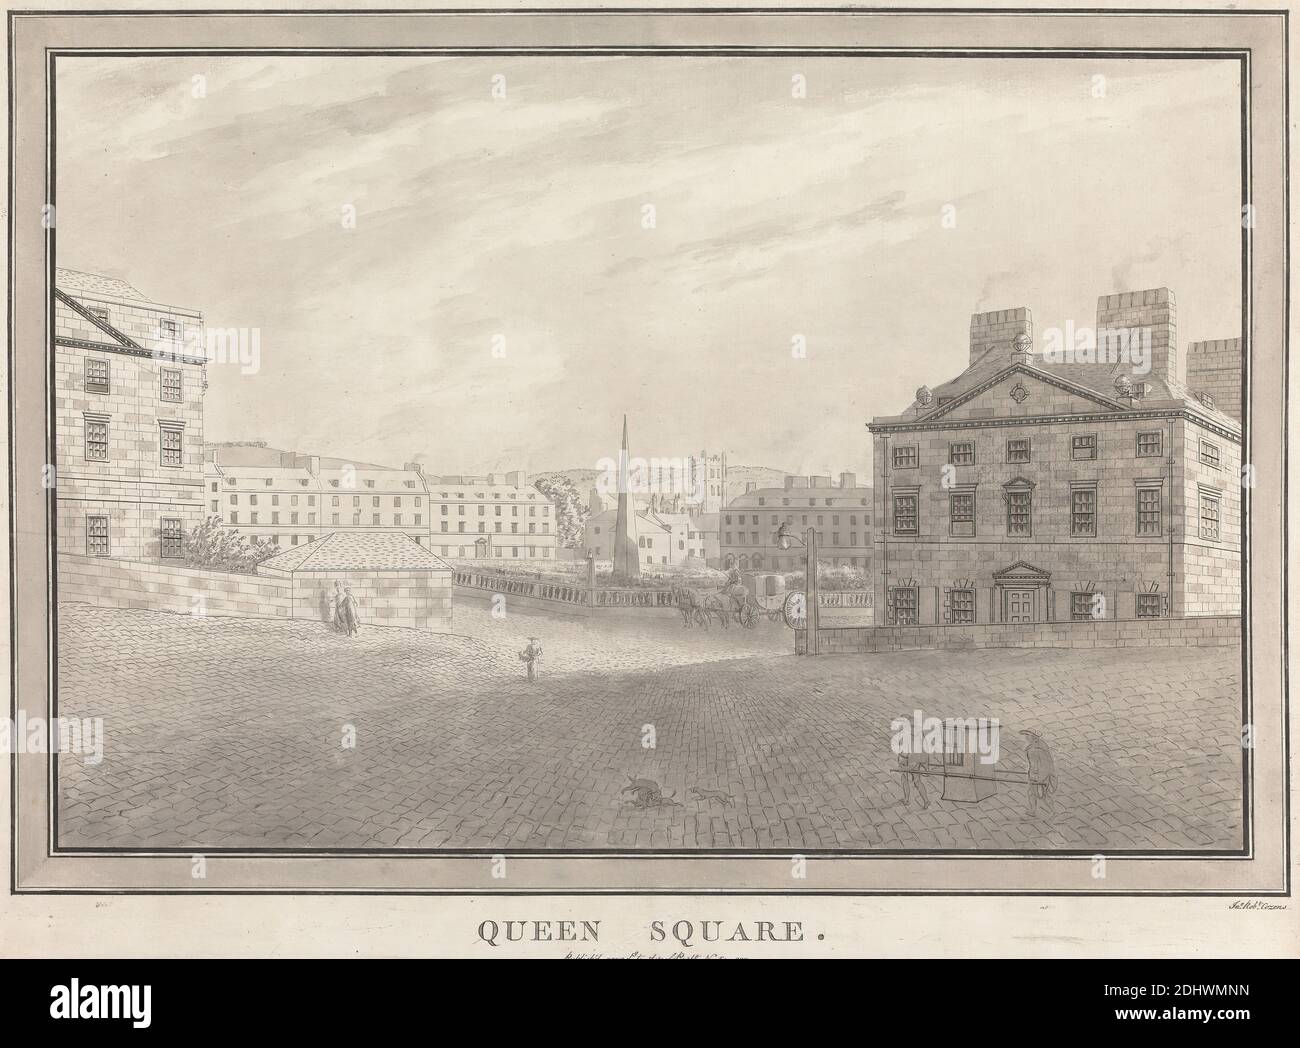 Bath: Queen Square, Print made by John Robert Cozens, 1752–1797, British, 1773, Etching, hand colored with gray wash on moderately thick, slightly textured, beige laid paper, Sheet: 10 15/16 x 14 7/8 inches (27.8 x 37.8 cm) and Image: 9 x 13 3/8 inches (22.8 x 34 cm), architectural subject, carriage, cobblestones, dogs (animals), fences, garden, genre subject, lampposts, litters, playing, sedan chairs, servants, spire, streets, tricorn, walking, wheels, Bath, Bath and Northeast Somerset, England, Queen Square, United Kingdom Stock Photo